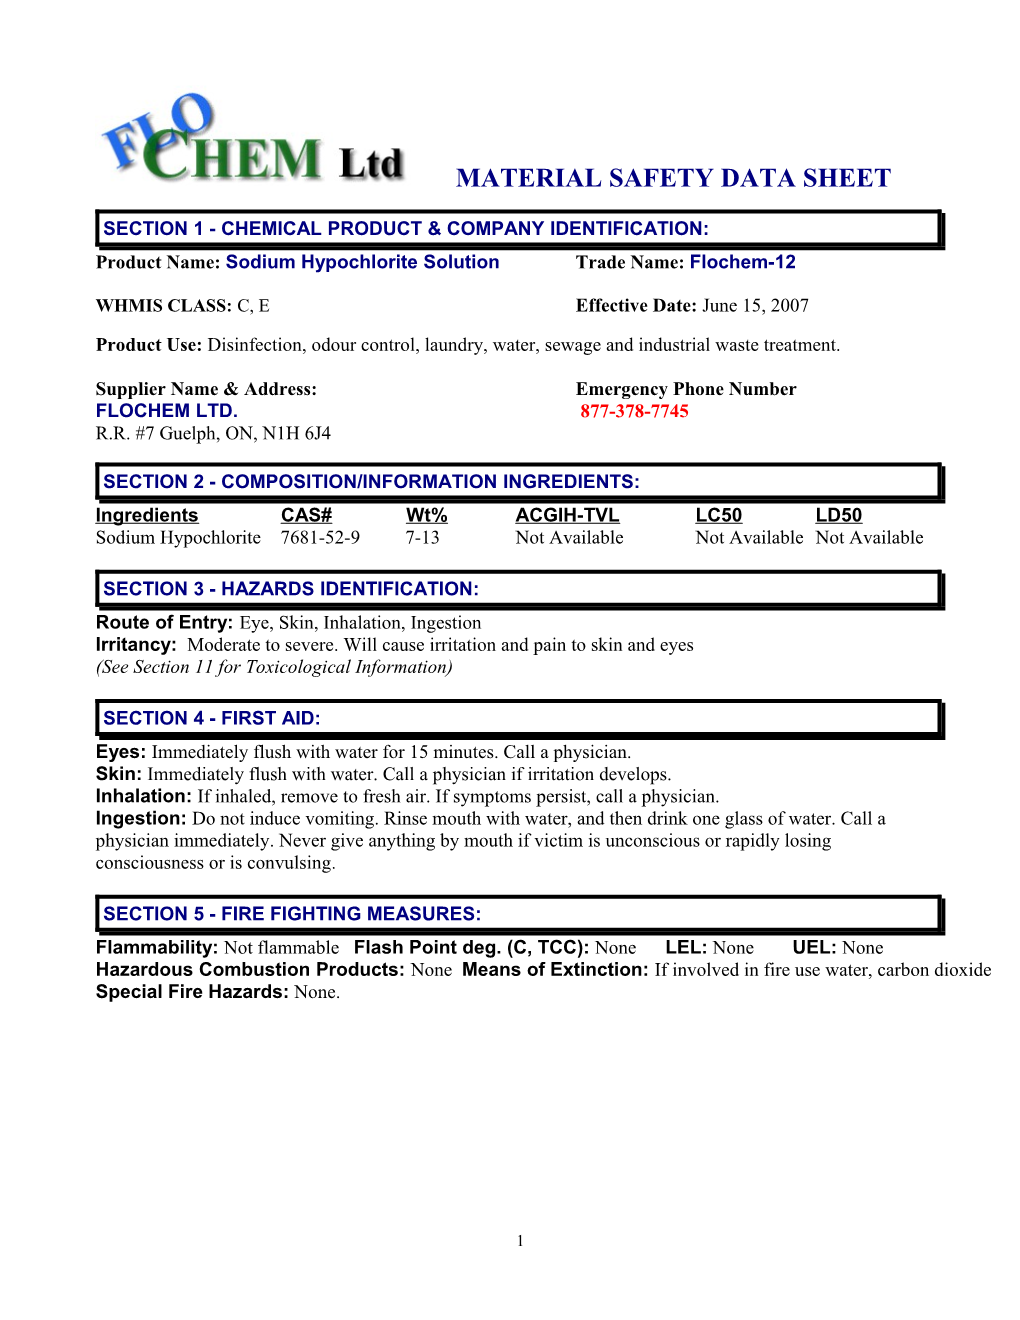 Section 1 - Chemical Product & Company Identification